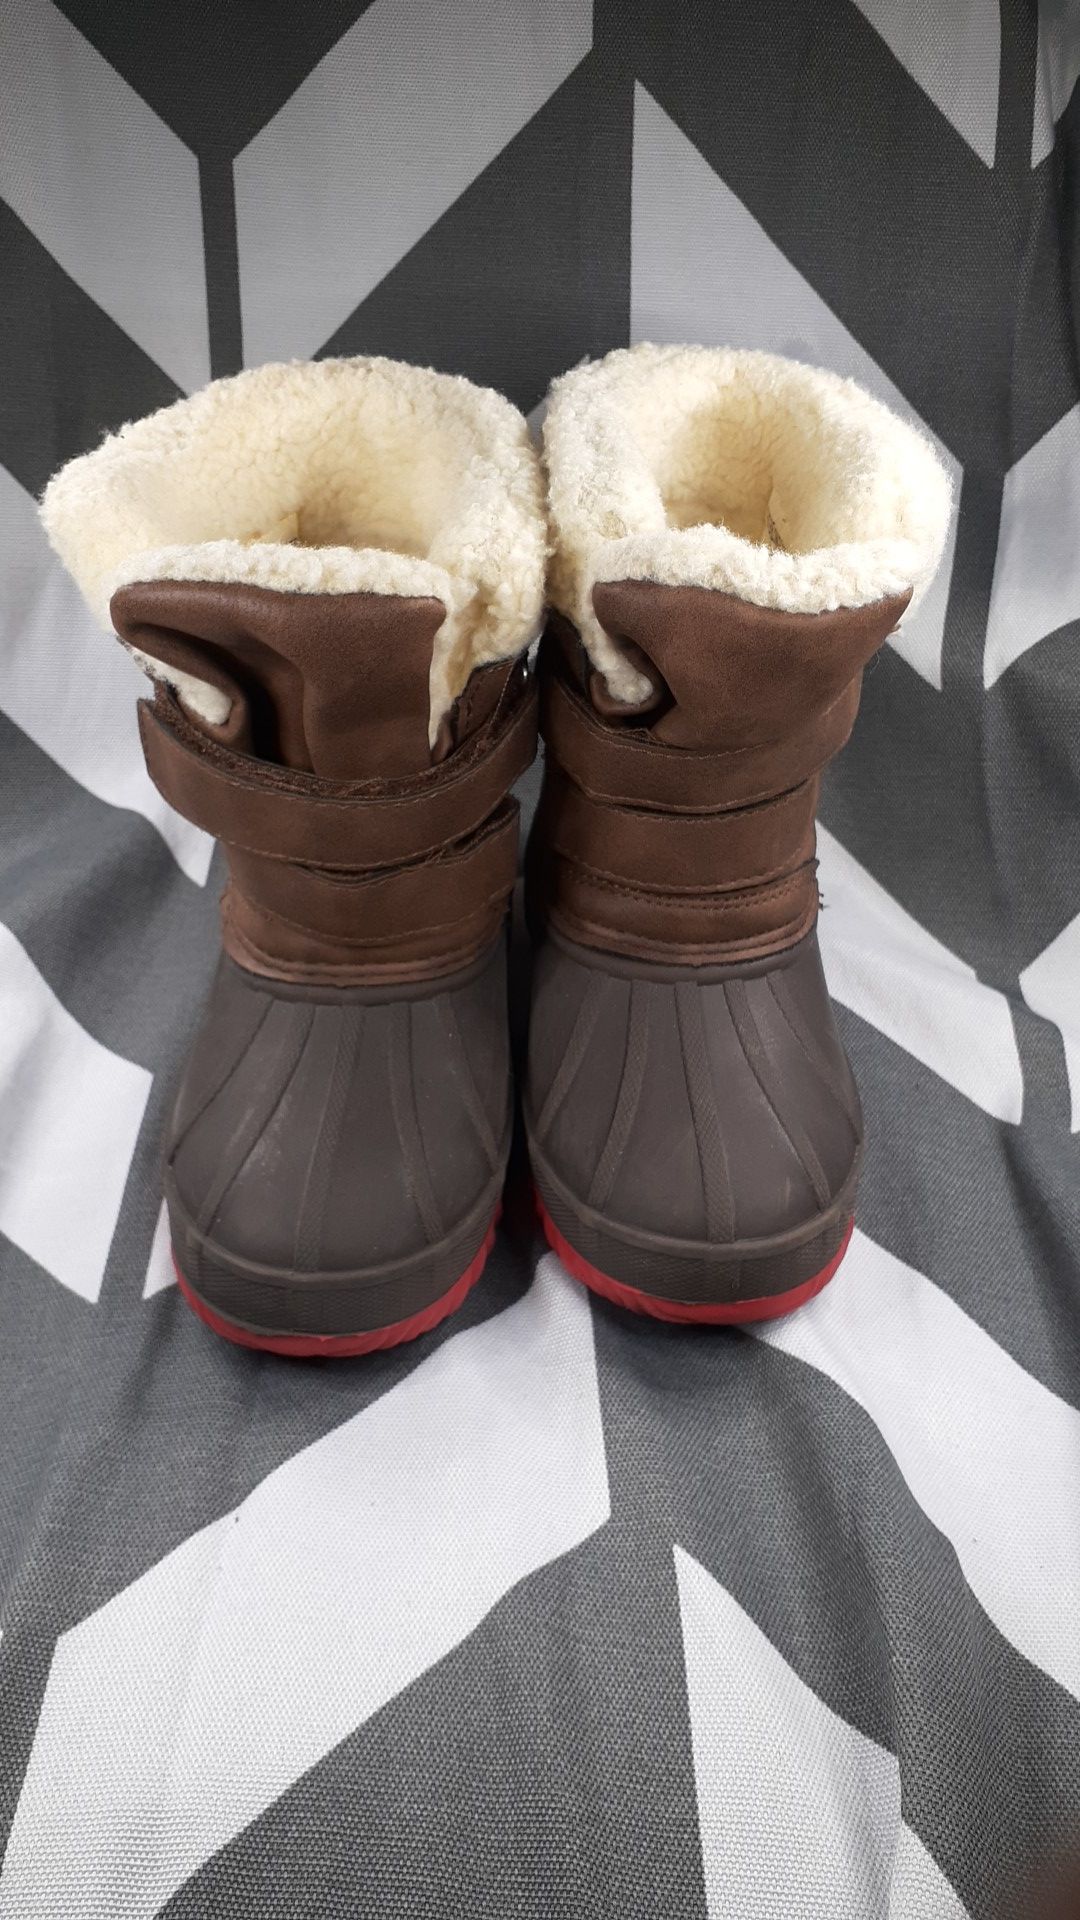 Kids warm waterproof snow boots boys size 6 shipping available